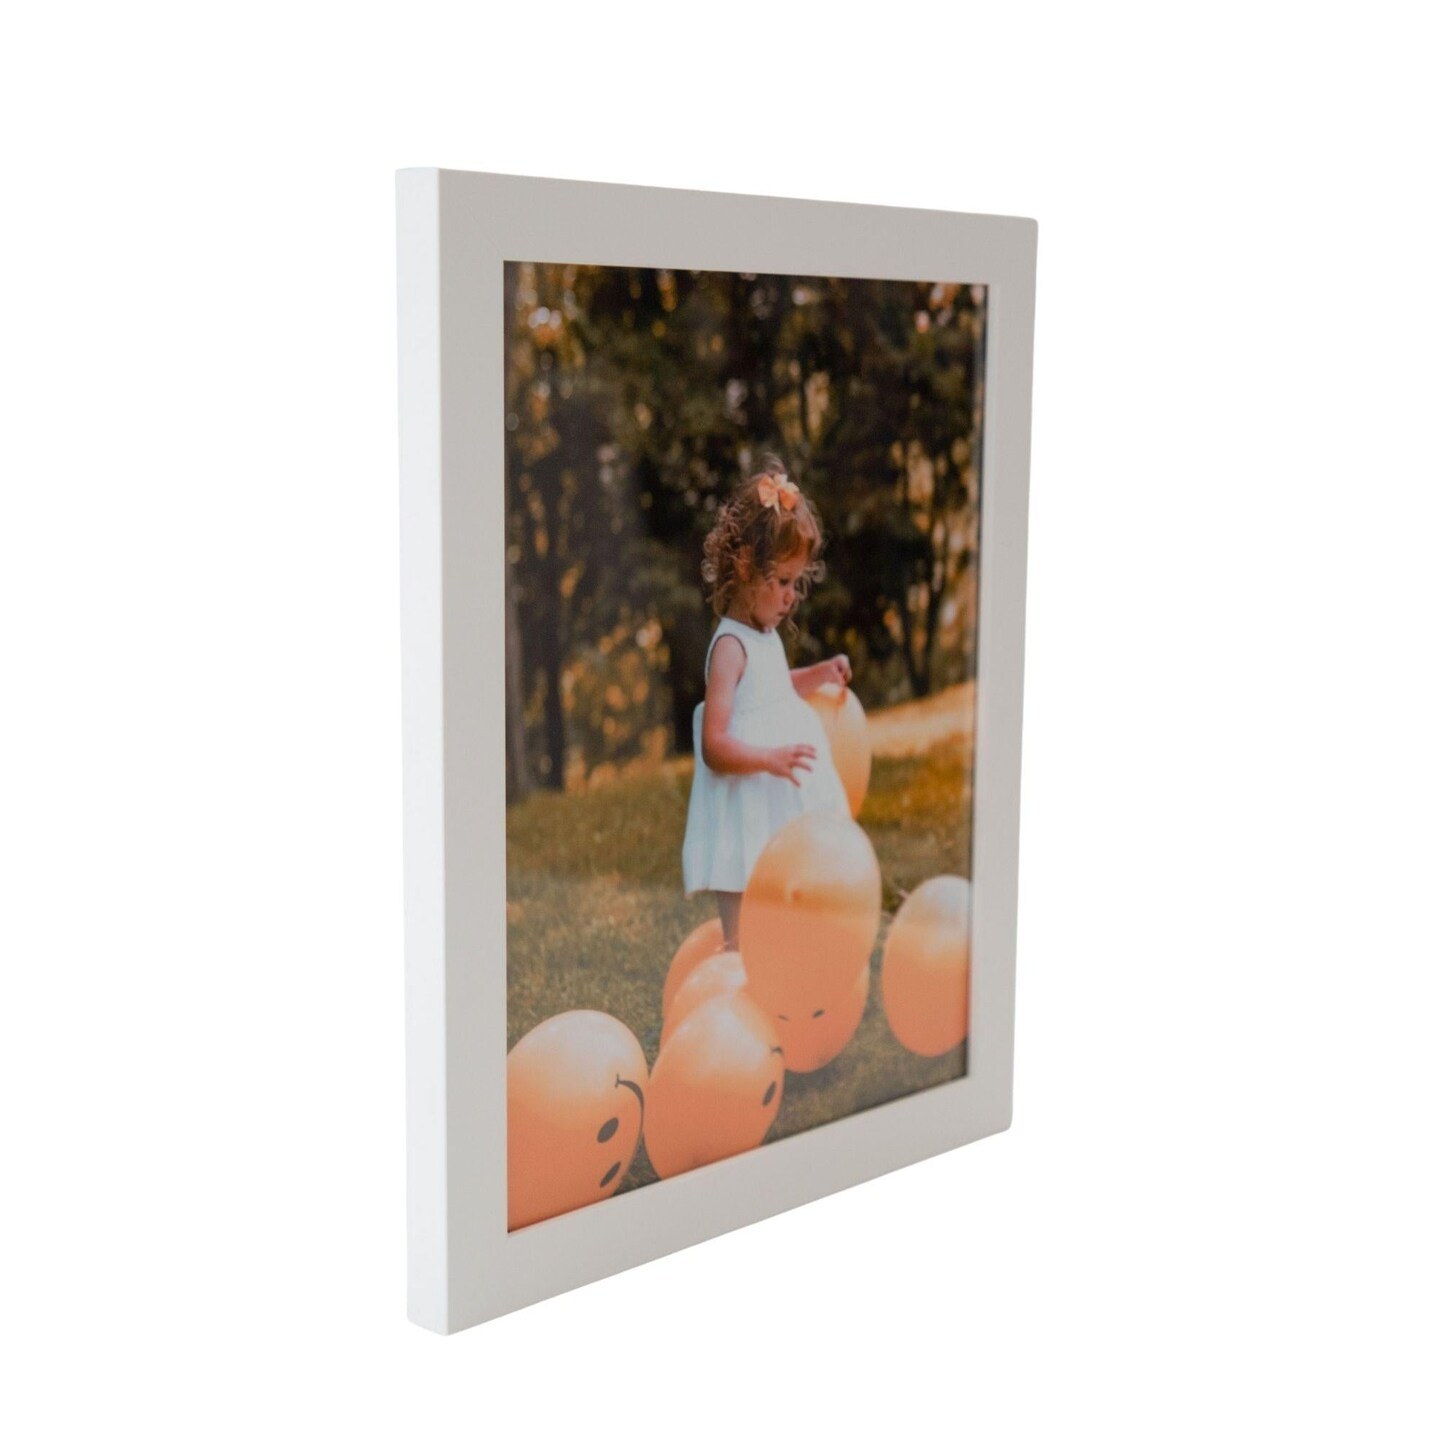 Gallery 24x22 Picture Frame Black 24x22 Frame 24 x 22 Poster Frames 24 x 22